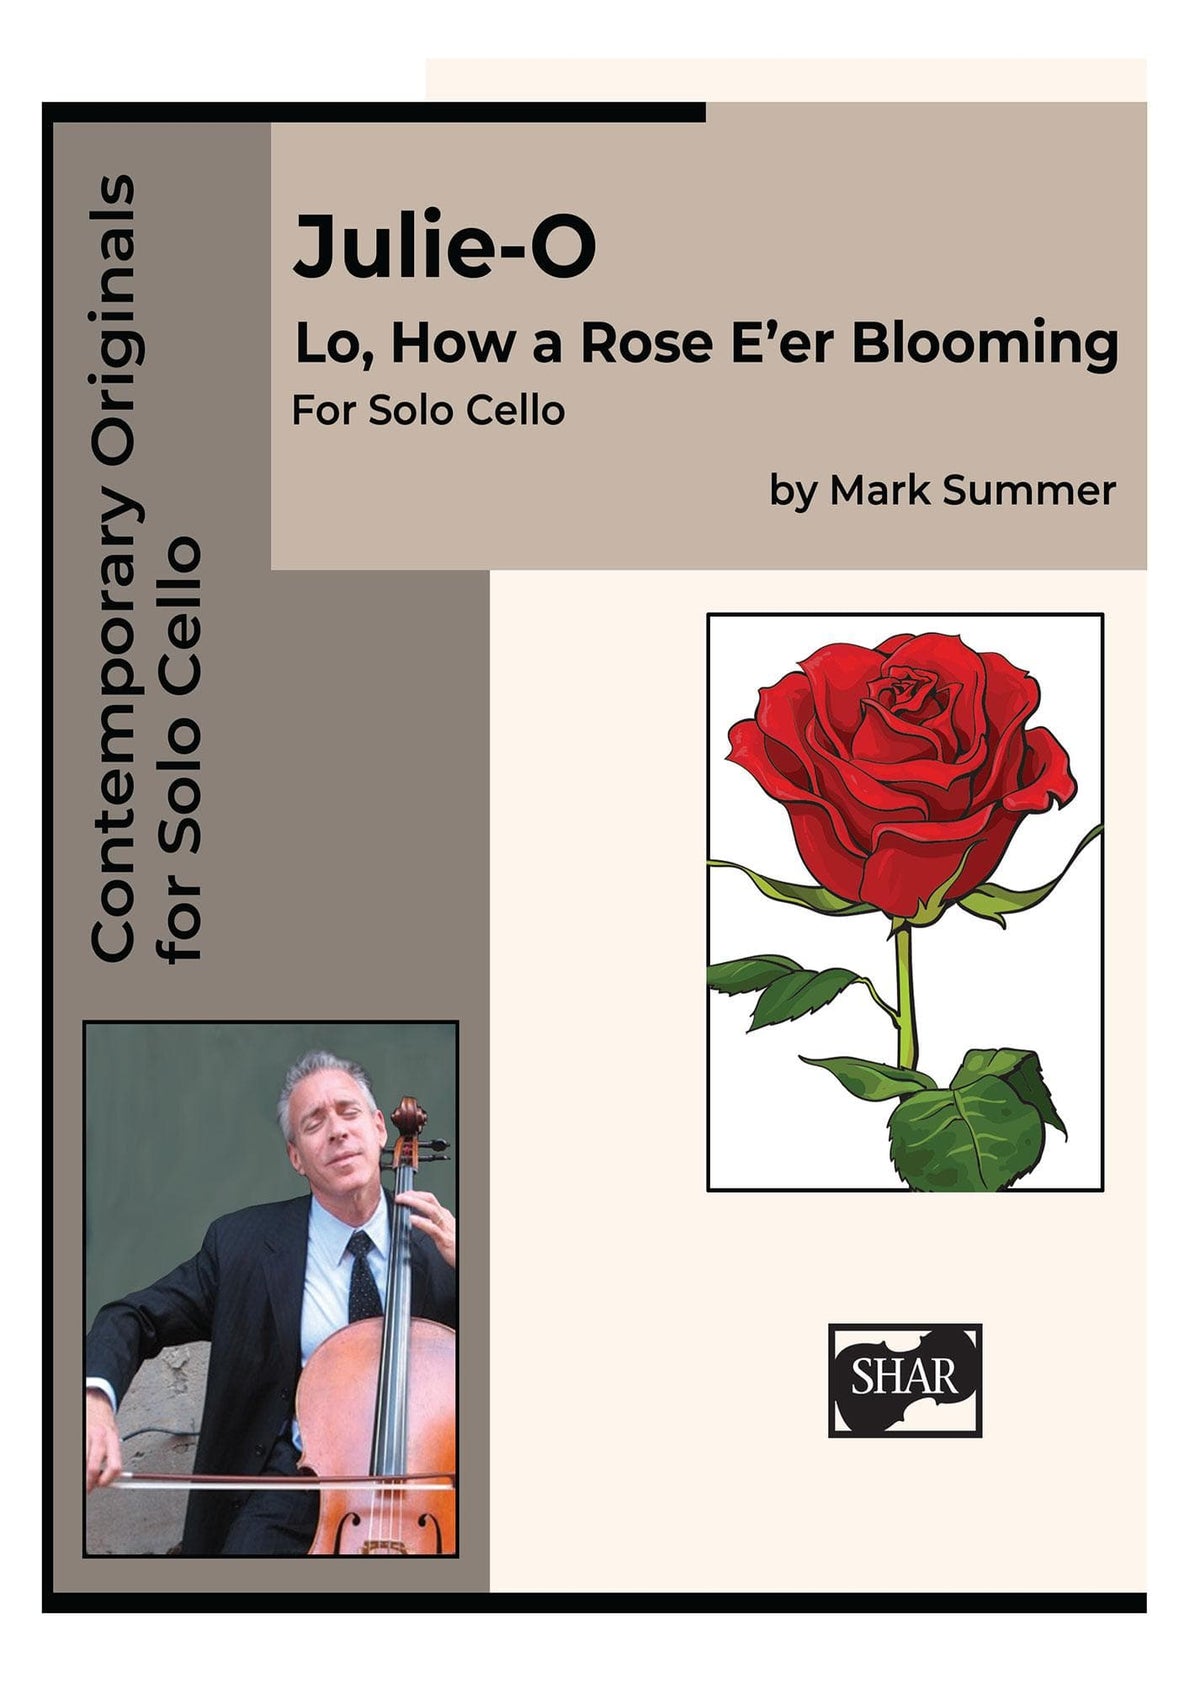 Summer, Mark - Julie-O Lo How a Rose E'er Blooming for Solo Cello - Digital Download